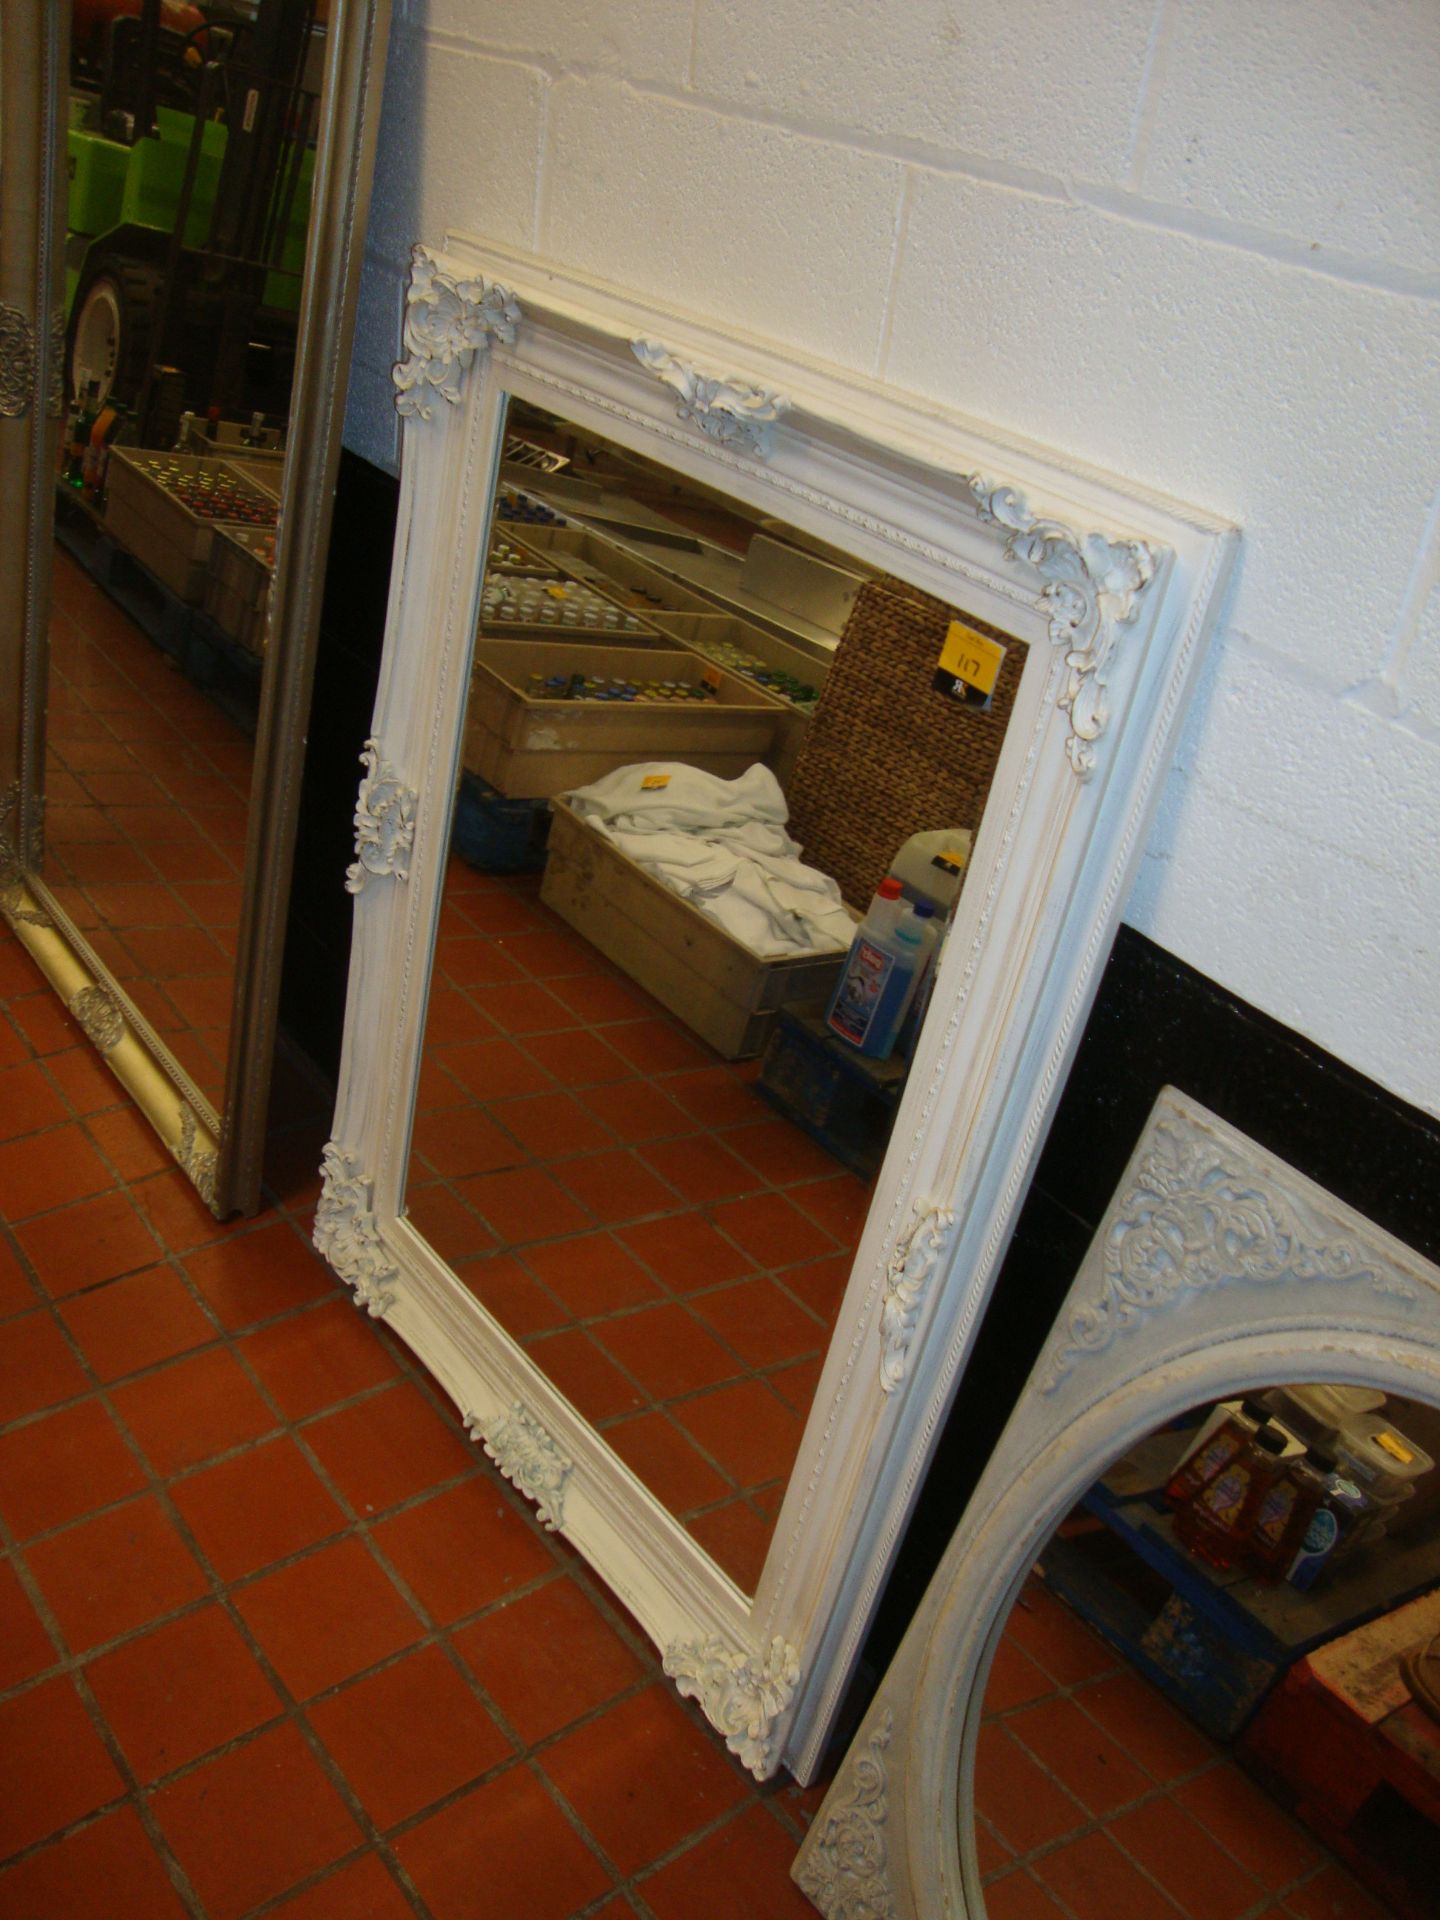 Large white ornately framed bevelled mirror max dimensions circa 36" x 48" - Image 2 of 2